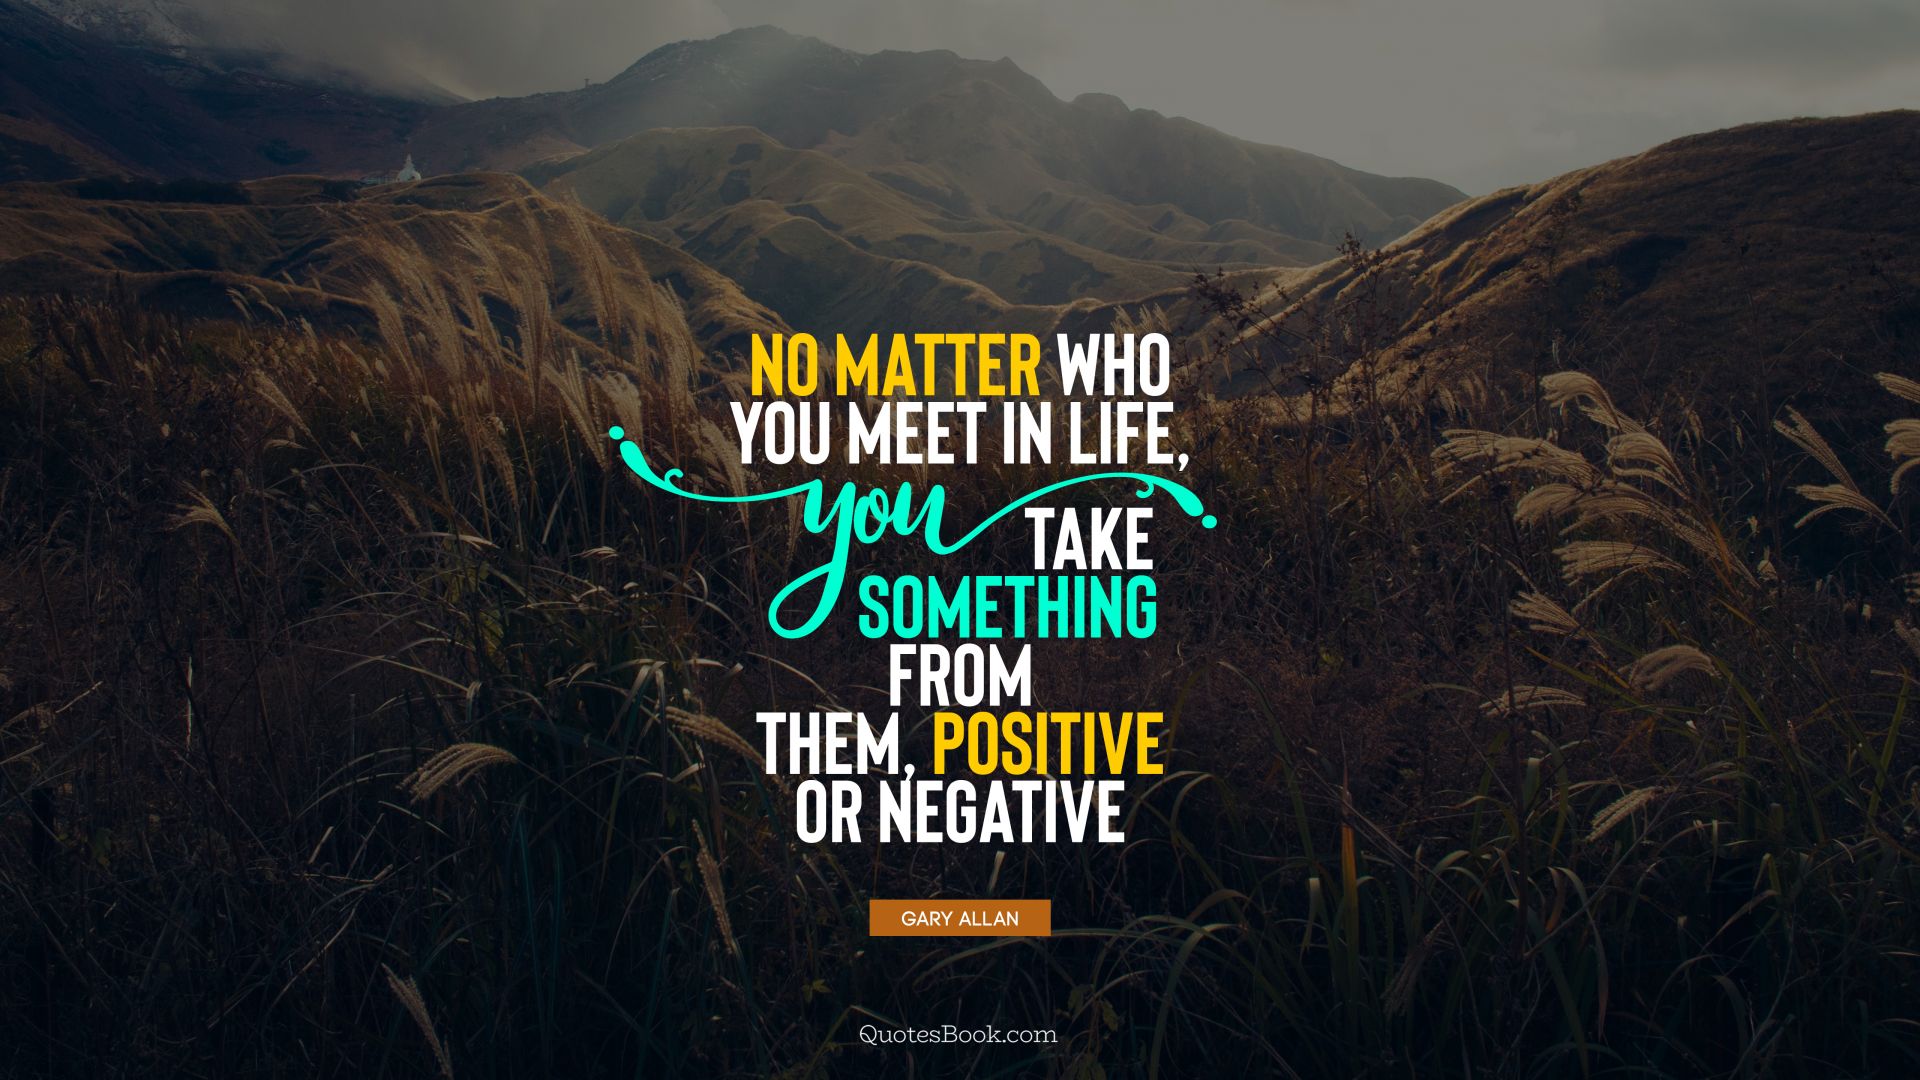 No matter who you meet in life, you take something from them, positive or negative. - Quote by Gary Allan